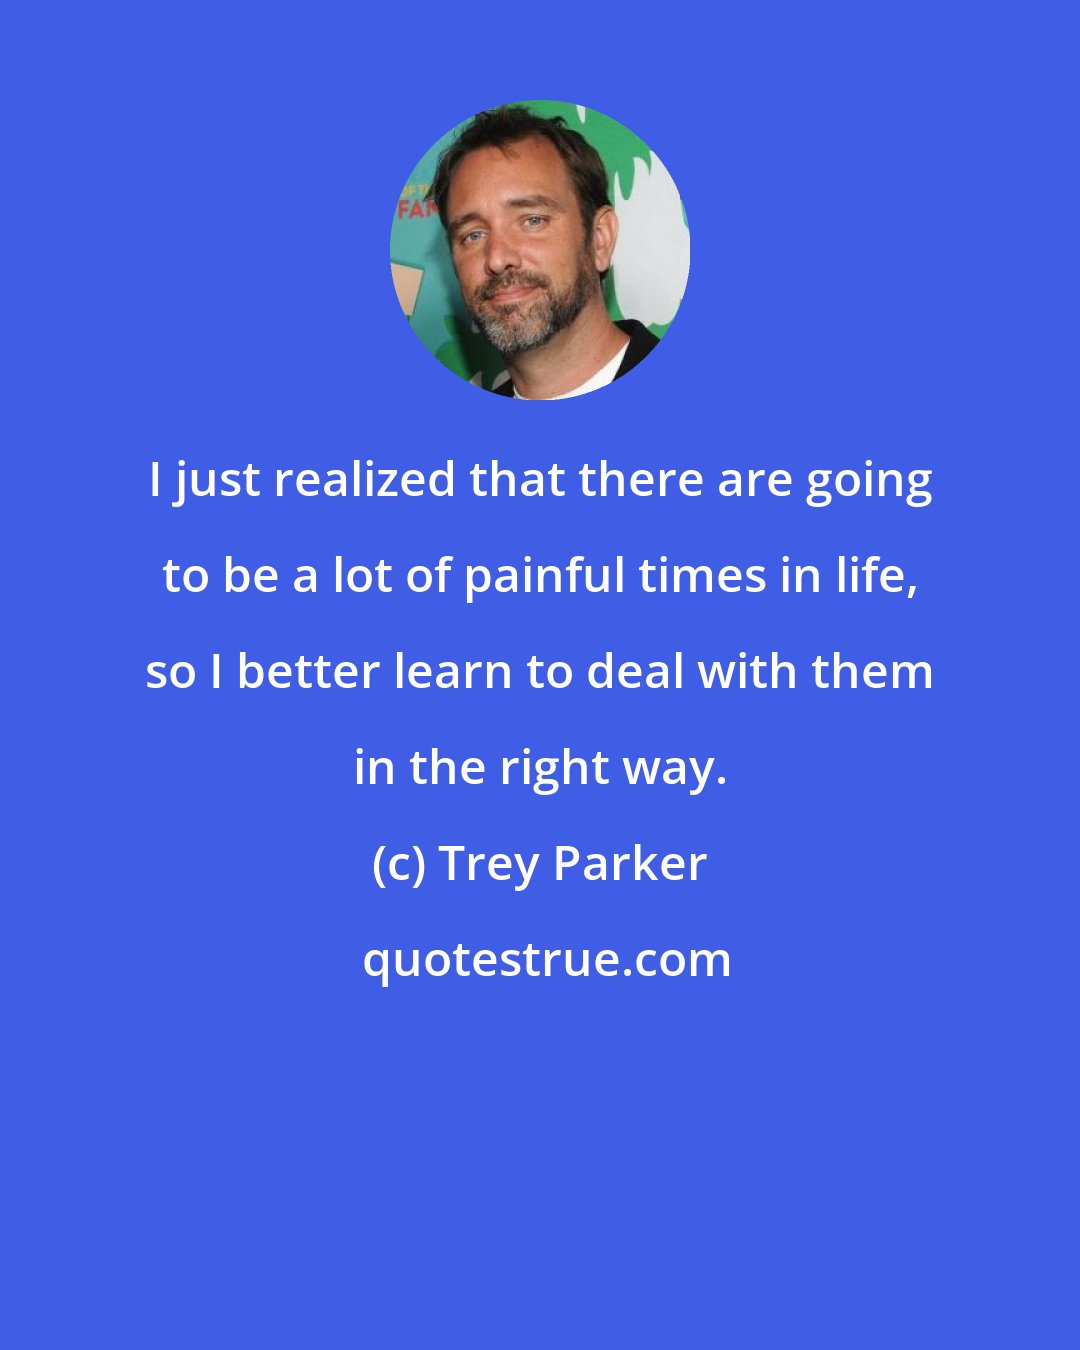 Trey Parker: I just realized that there are going to be a lot of painful times in life, so I better learn to deal with them in the right way.